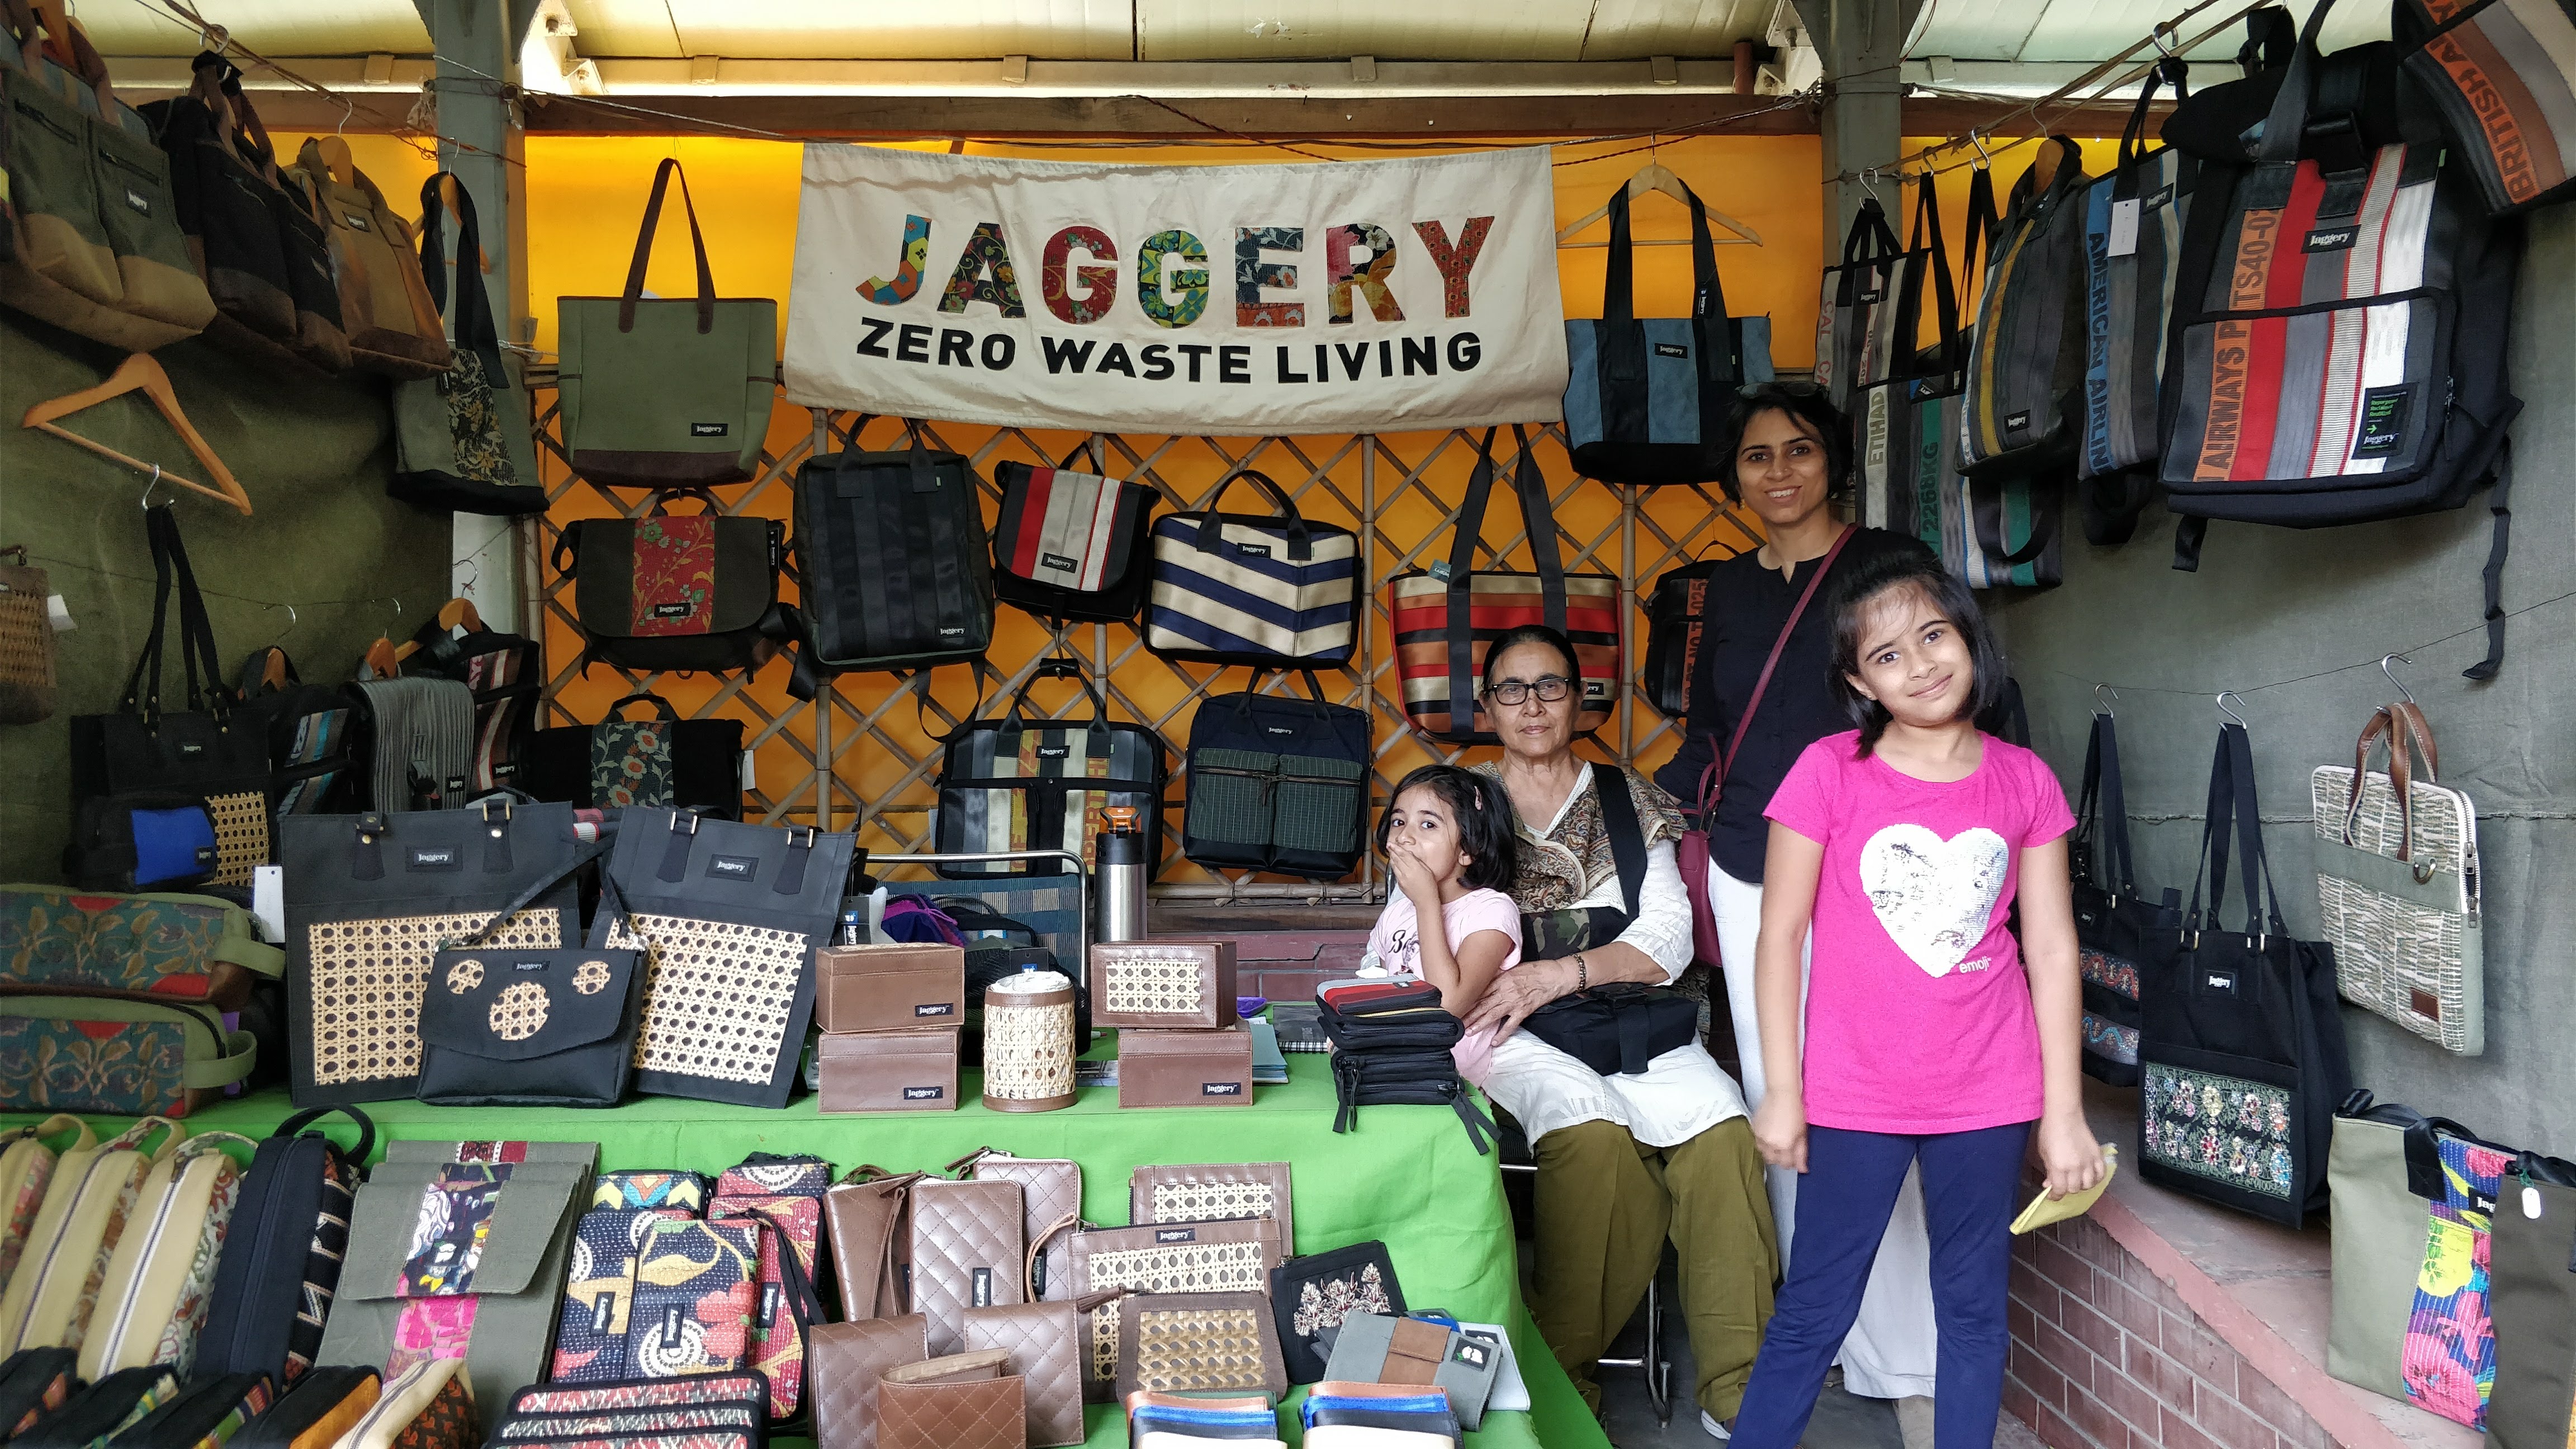 Various products from Jaggery Bag